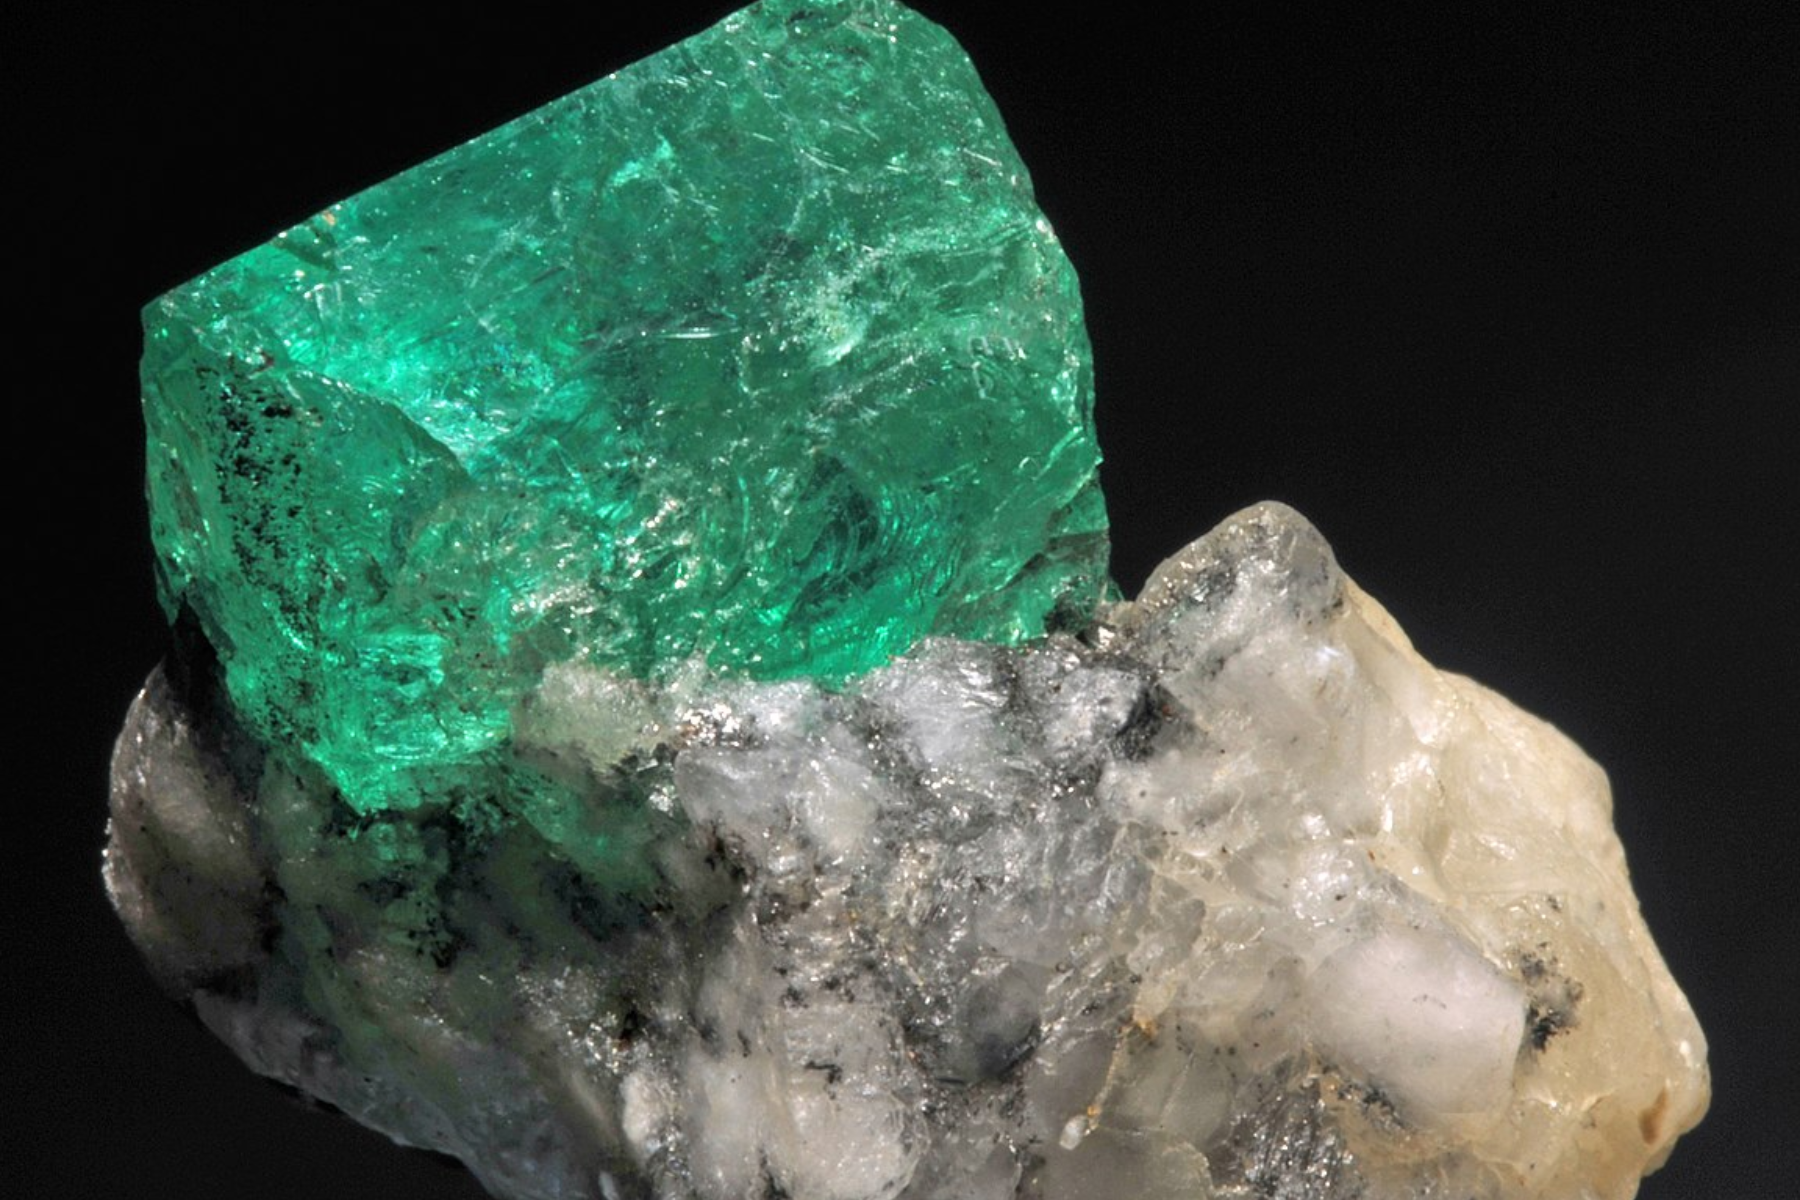 An image of a raw emerald stone still attached to its host rock